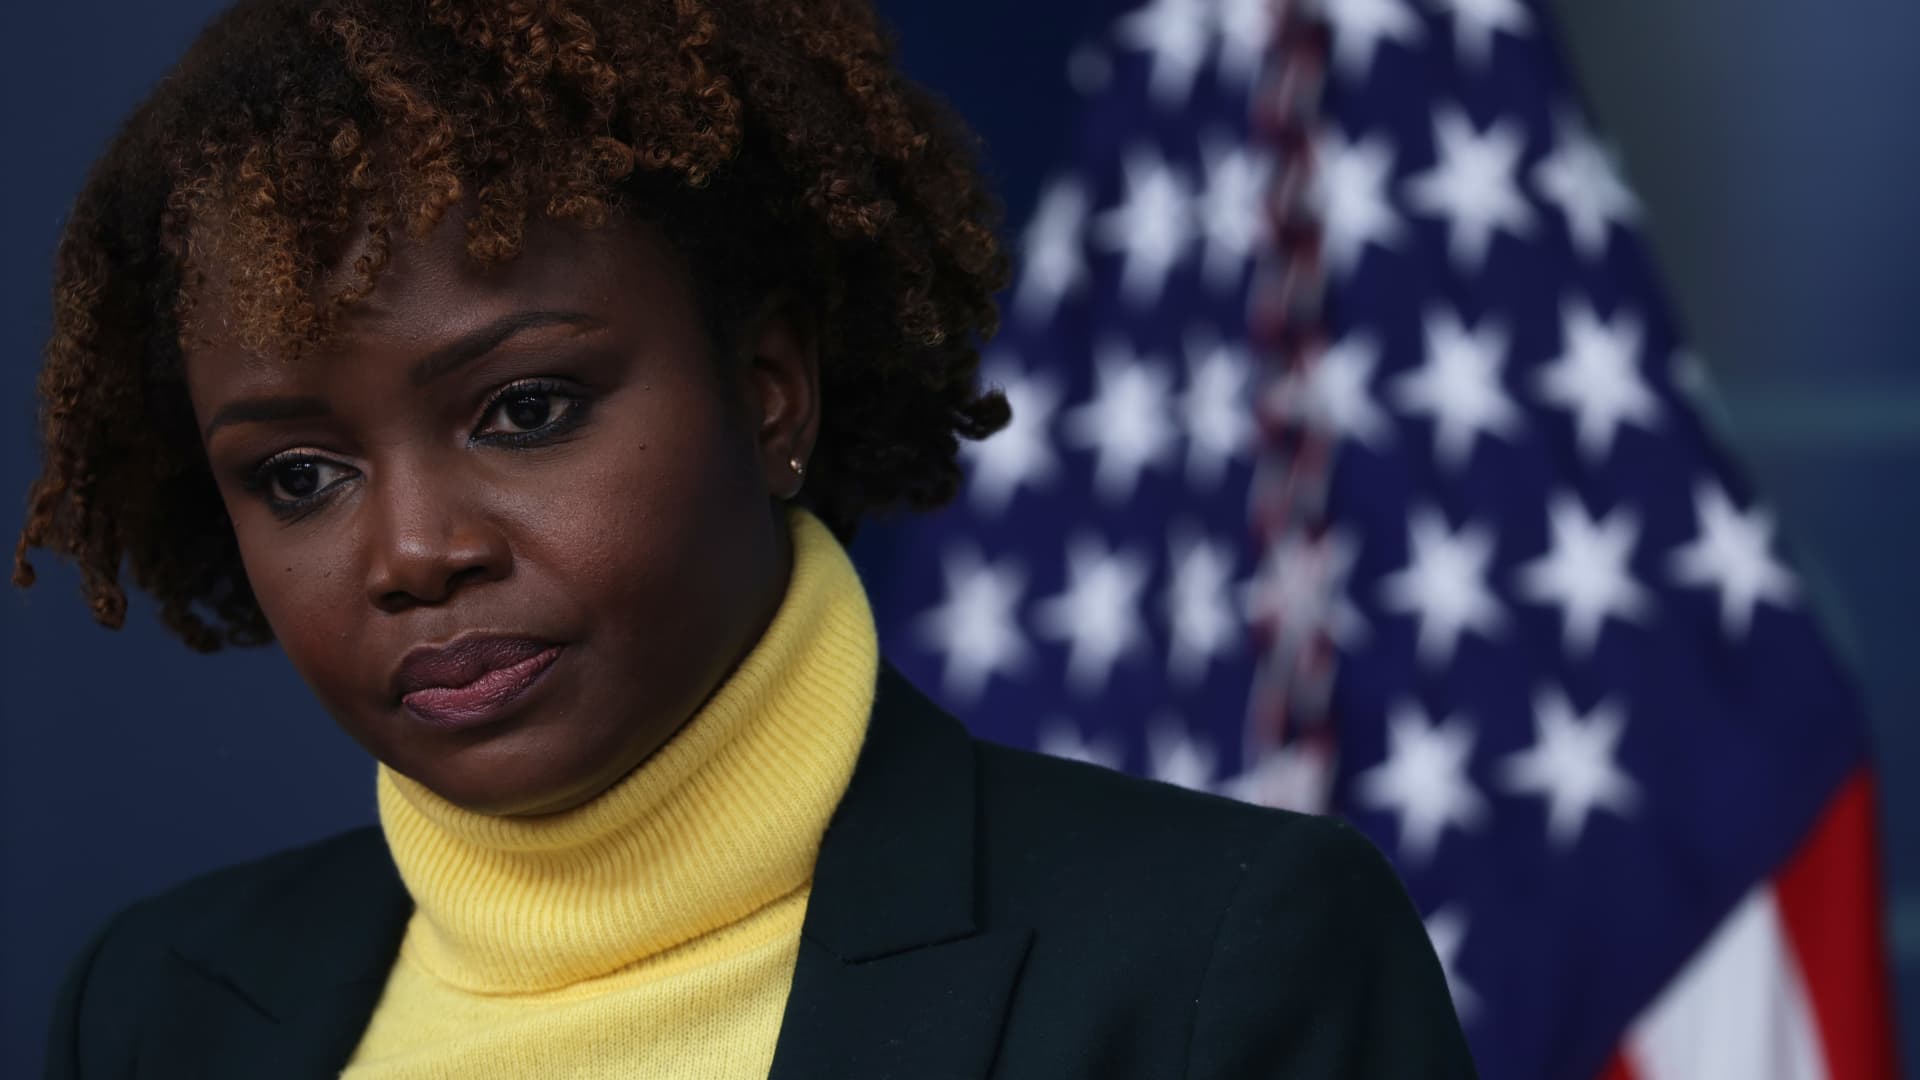 White House Principal Deputy Press Secretary Karine Jean-Pierre conducts a daily press briefing at the James S. Brady Press Briefing Room of the White House on Feb. 14, 2022 in Washington, DC. Jean-Pierre announced on March 27, 2022 that she tested positive for Covid-19.